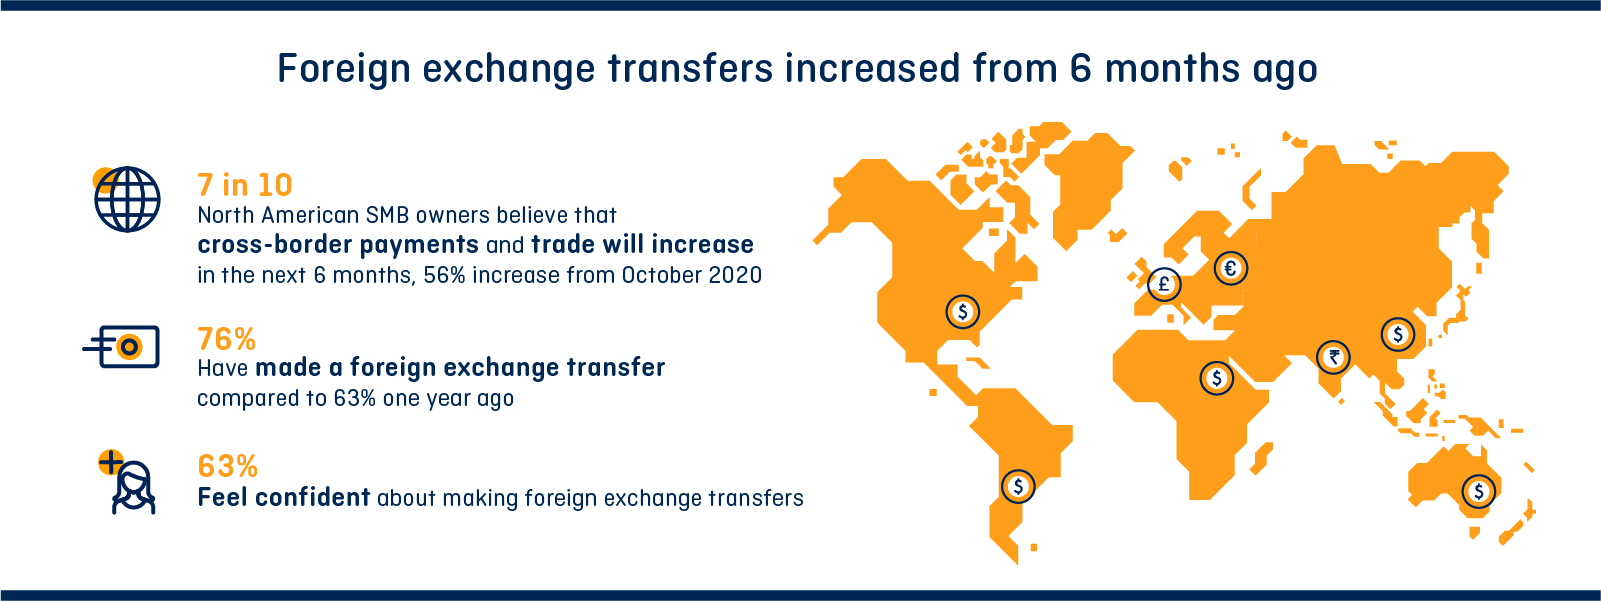 Foreign exchange transfers are up